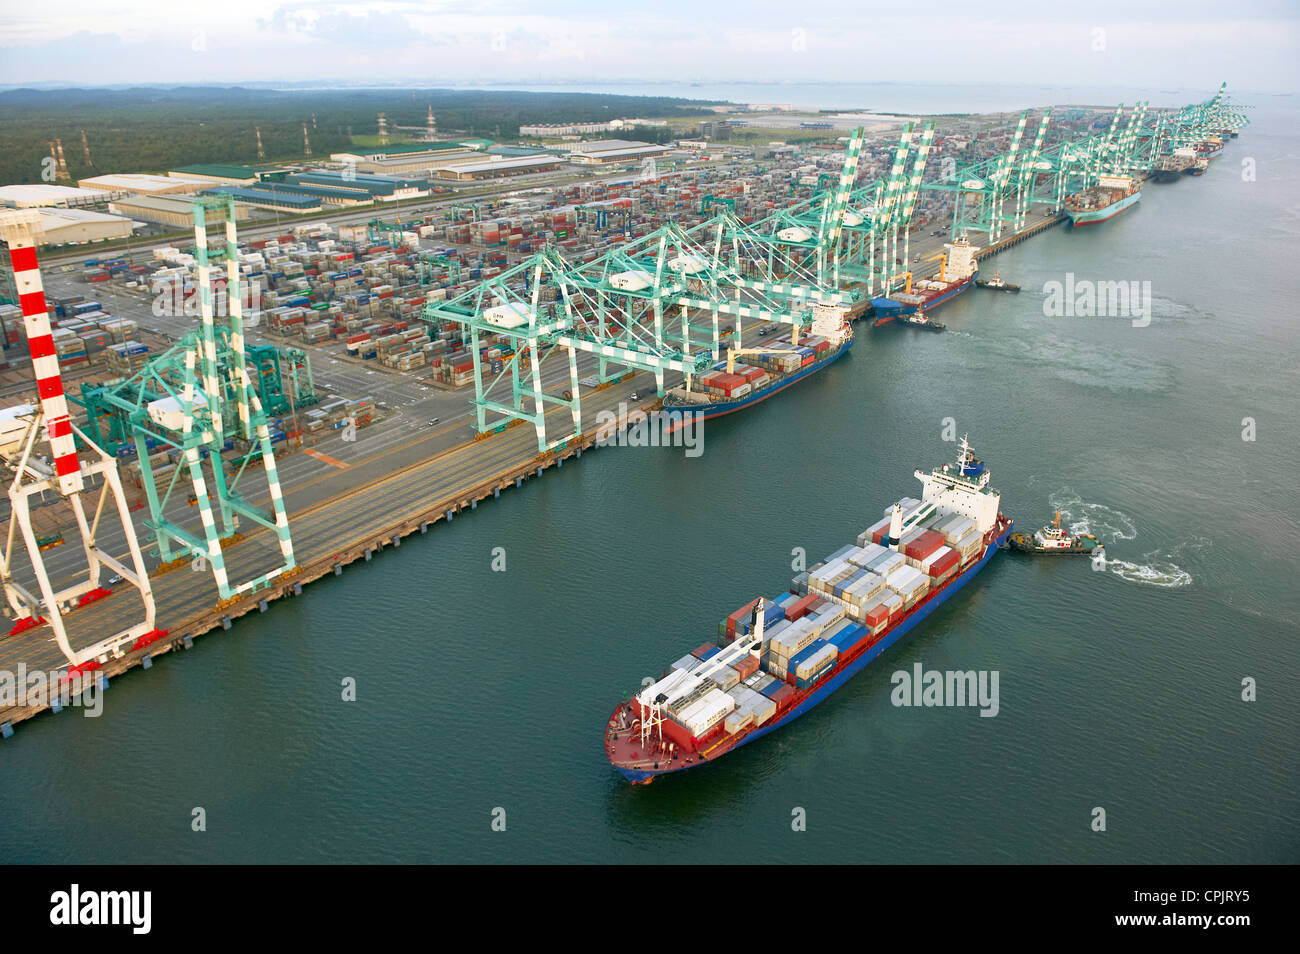 A ship passing by a container terminal shipping port in Johor, Malaysia. Stock Photo